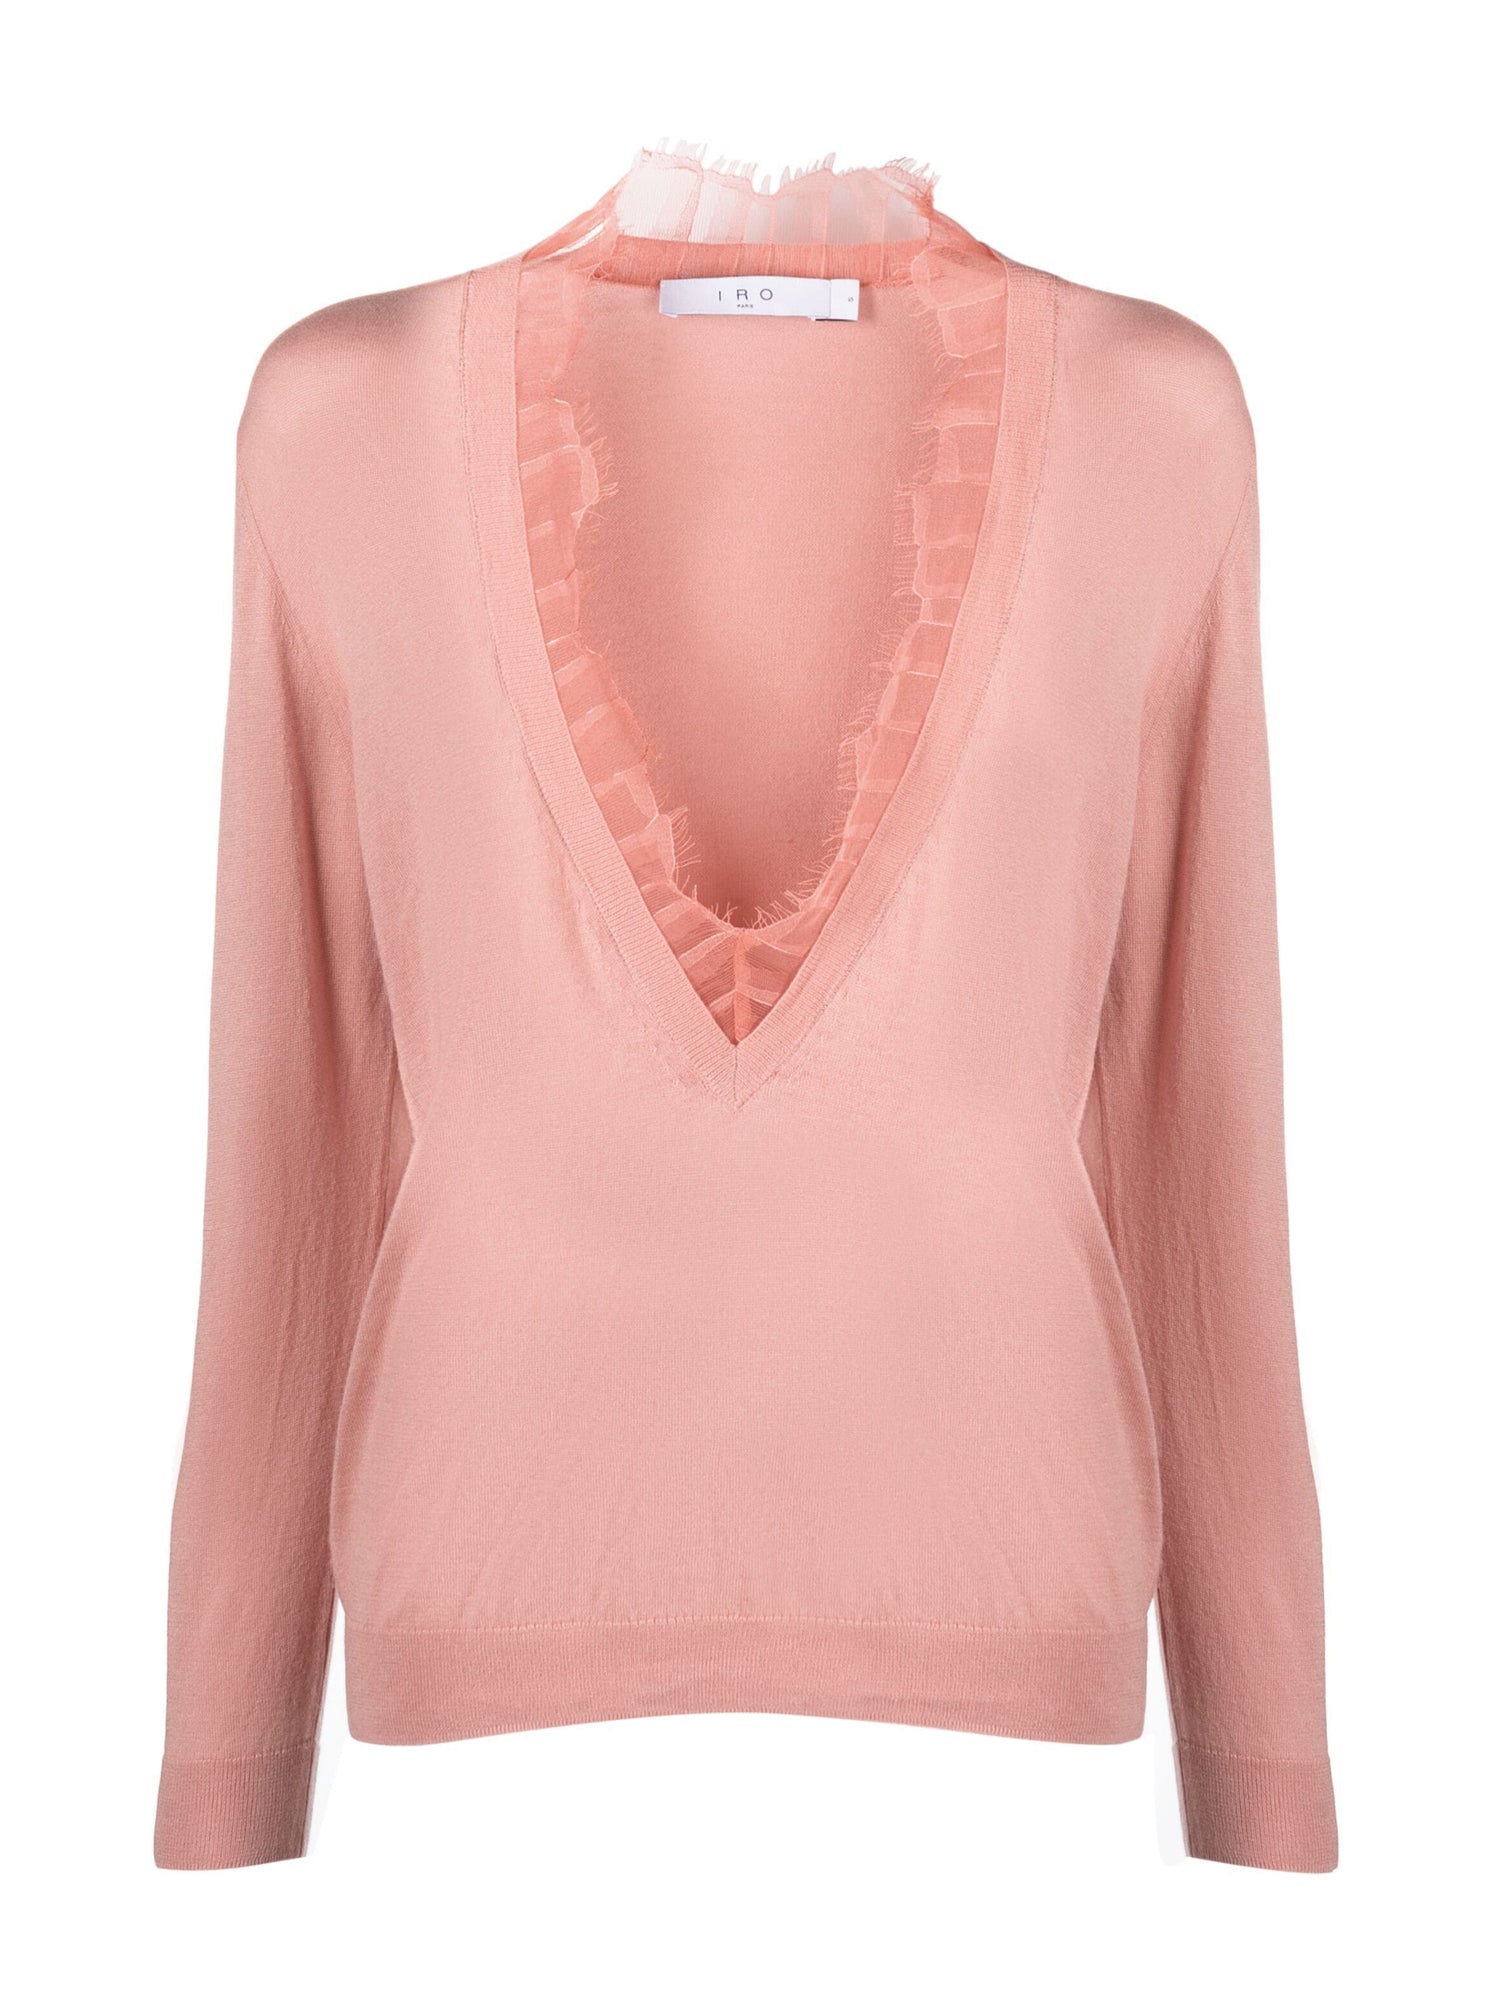 JAYDEN knitted sweater, coral pink